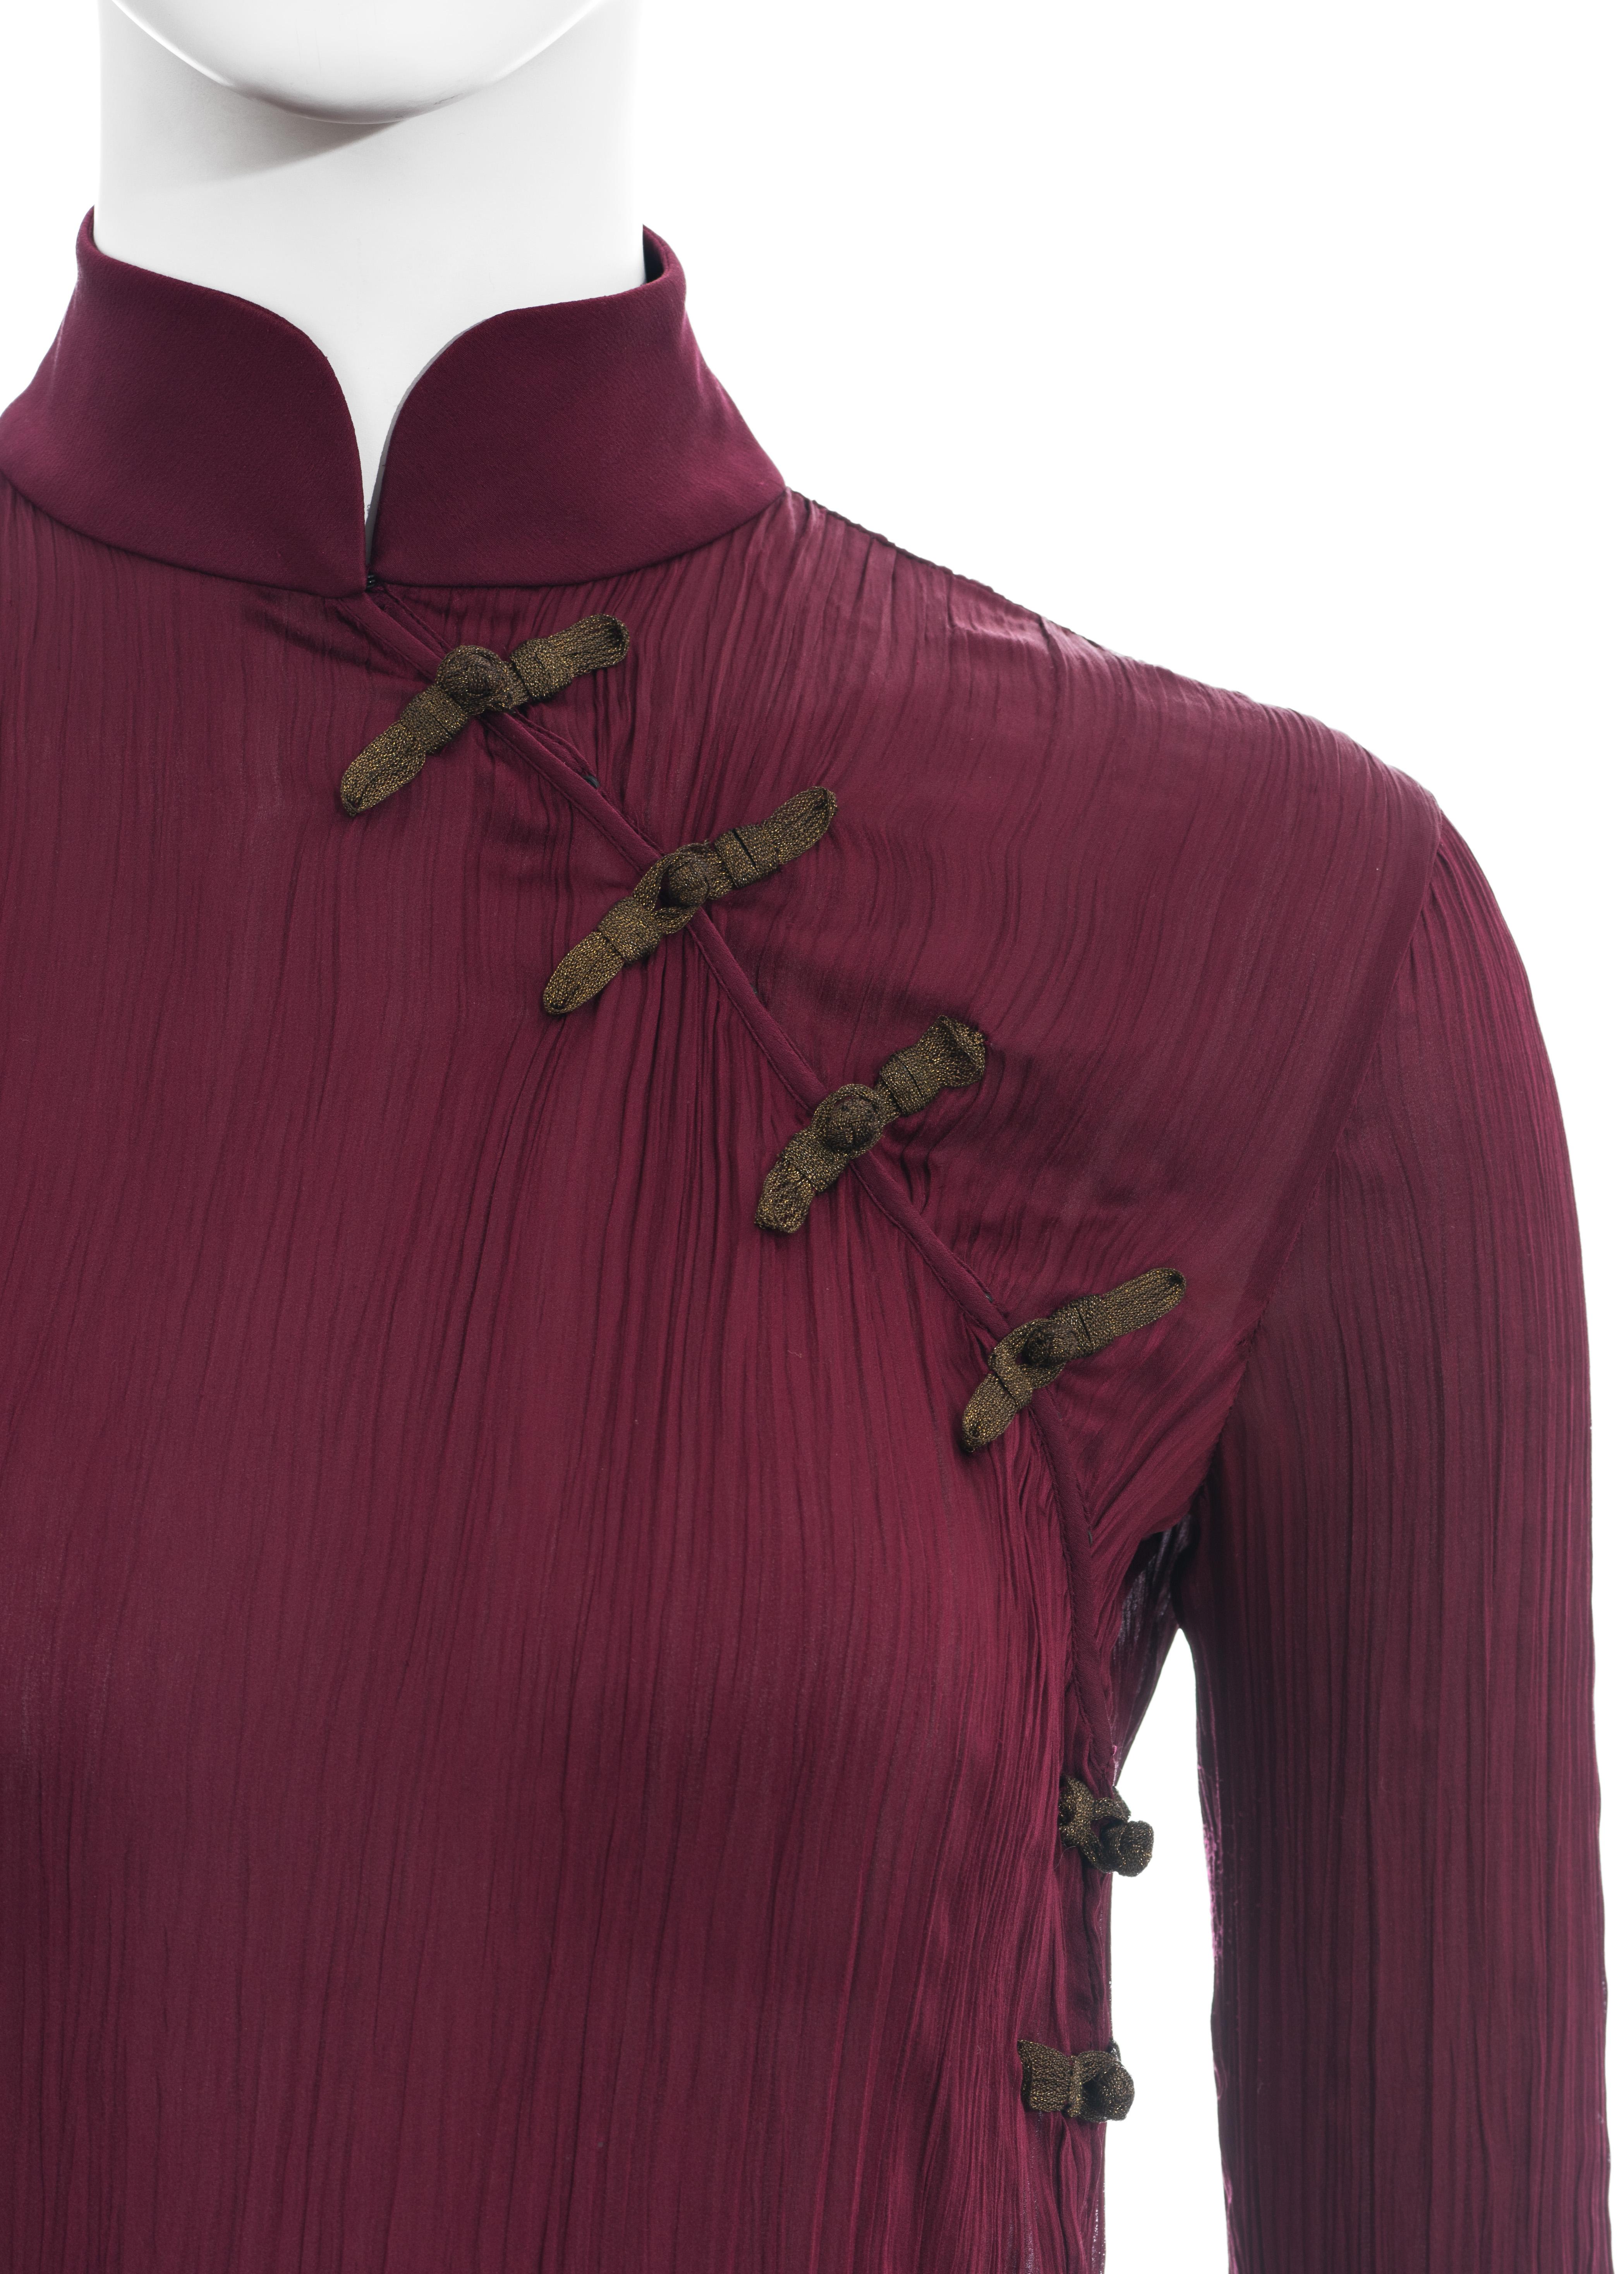 Women's Christian Dior by John Galliano burgundy pleated silk blouse, ss 1999 For Sale